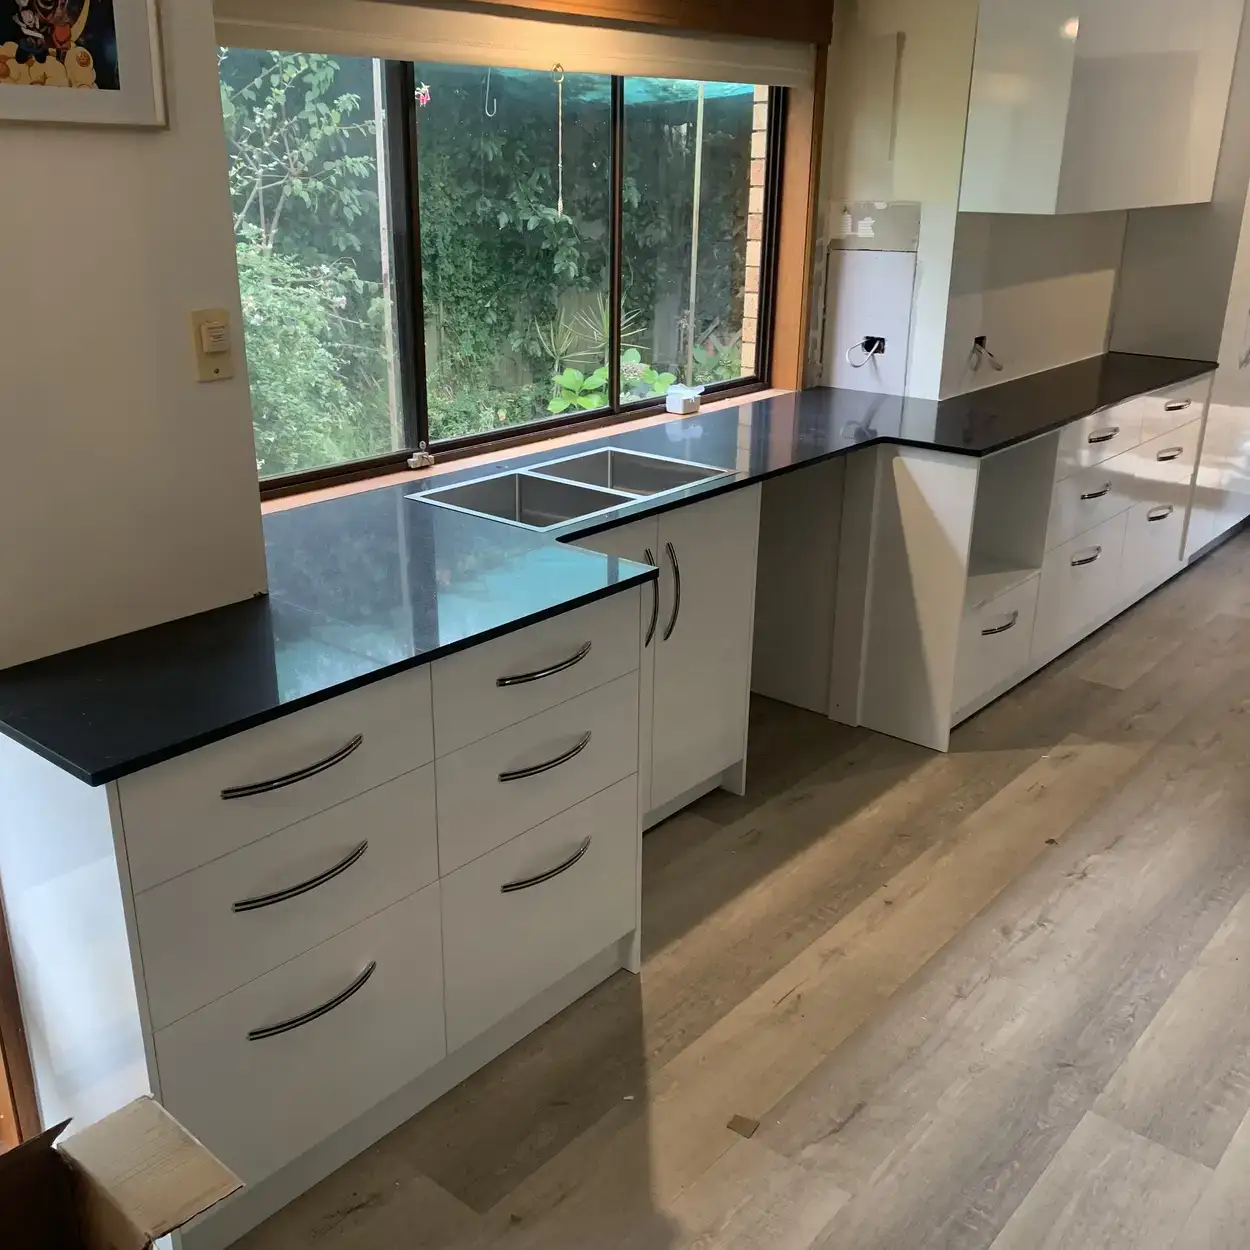 Image of a countertop completed by SA Marble and Granite.